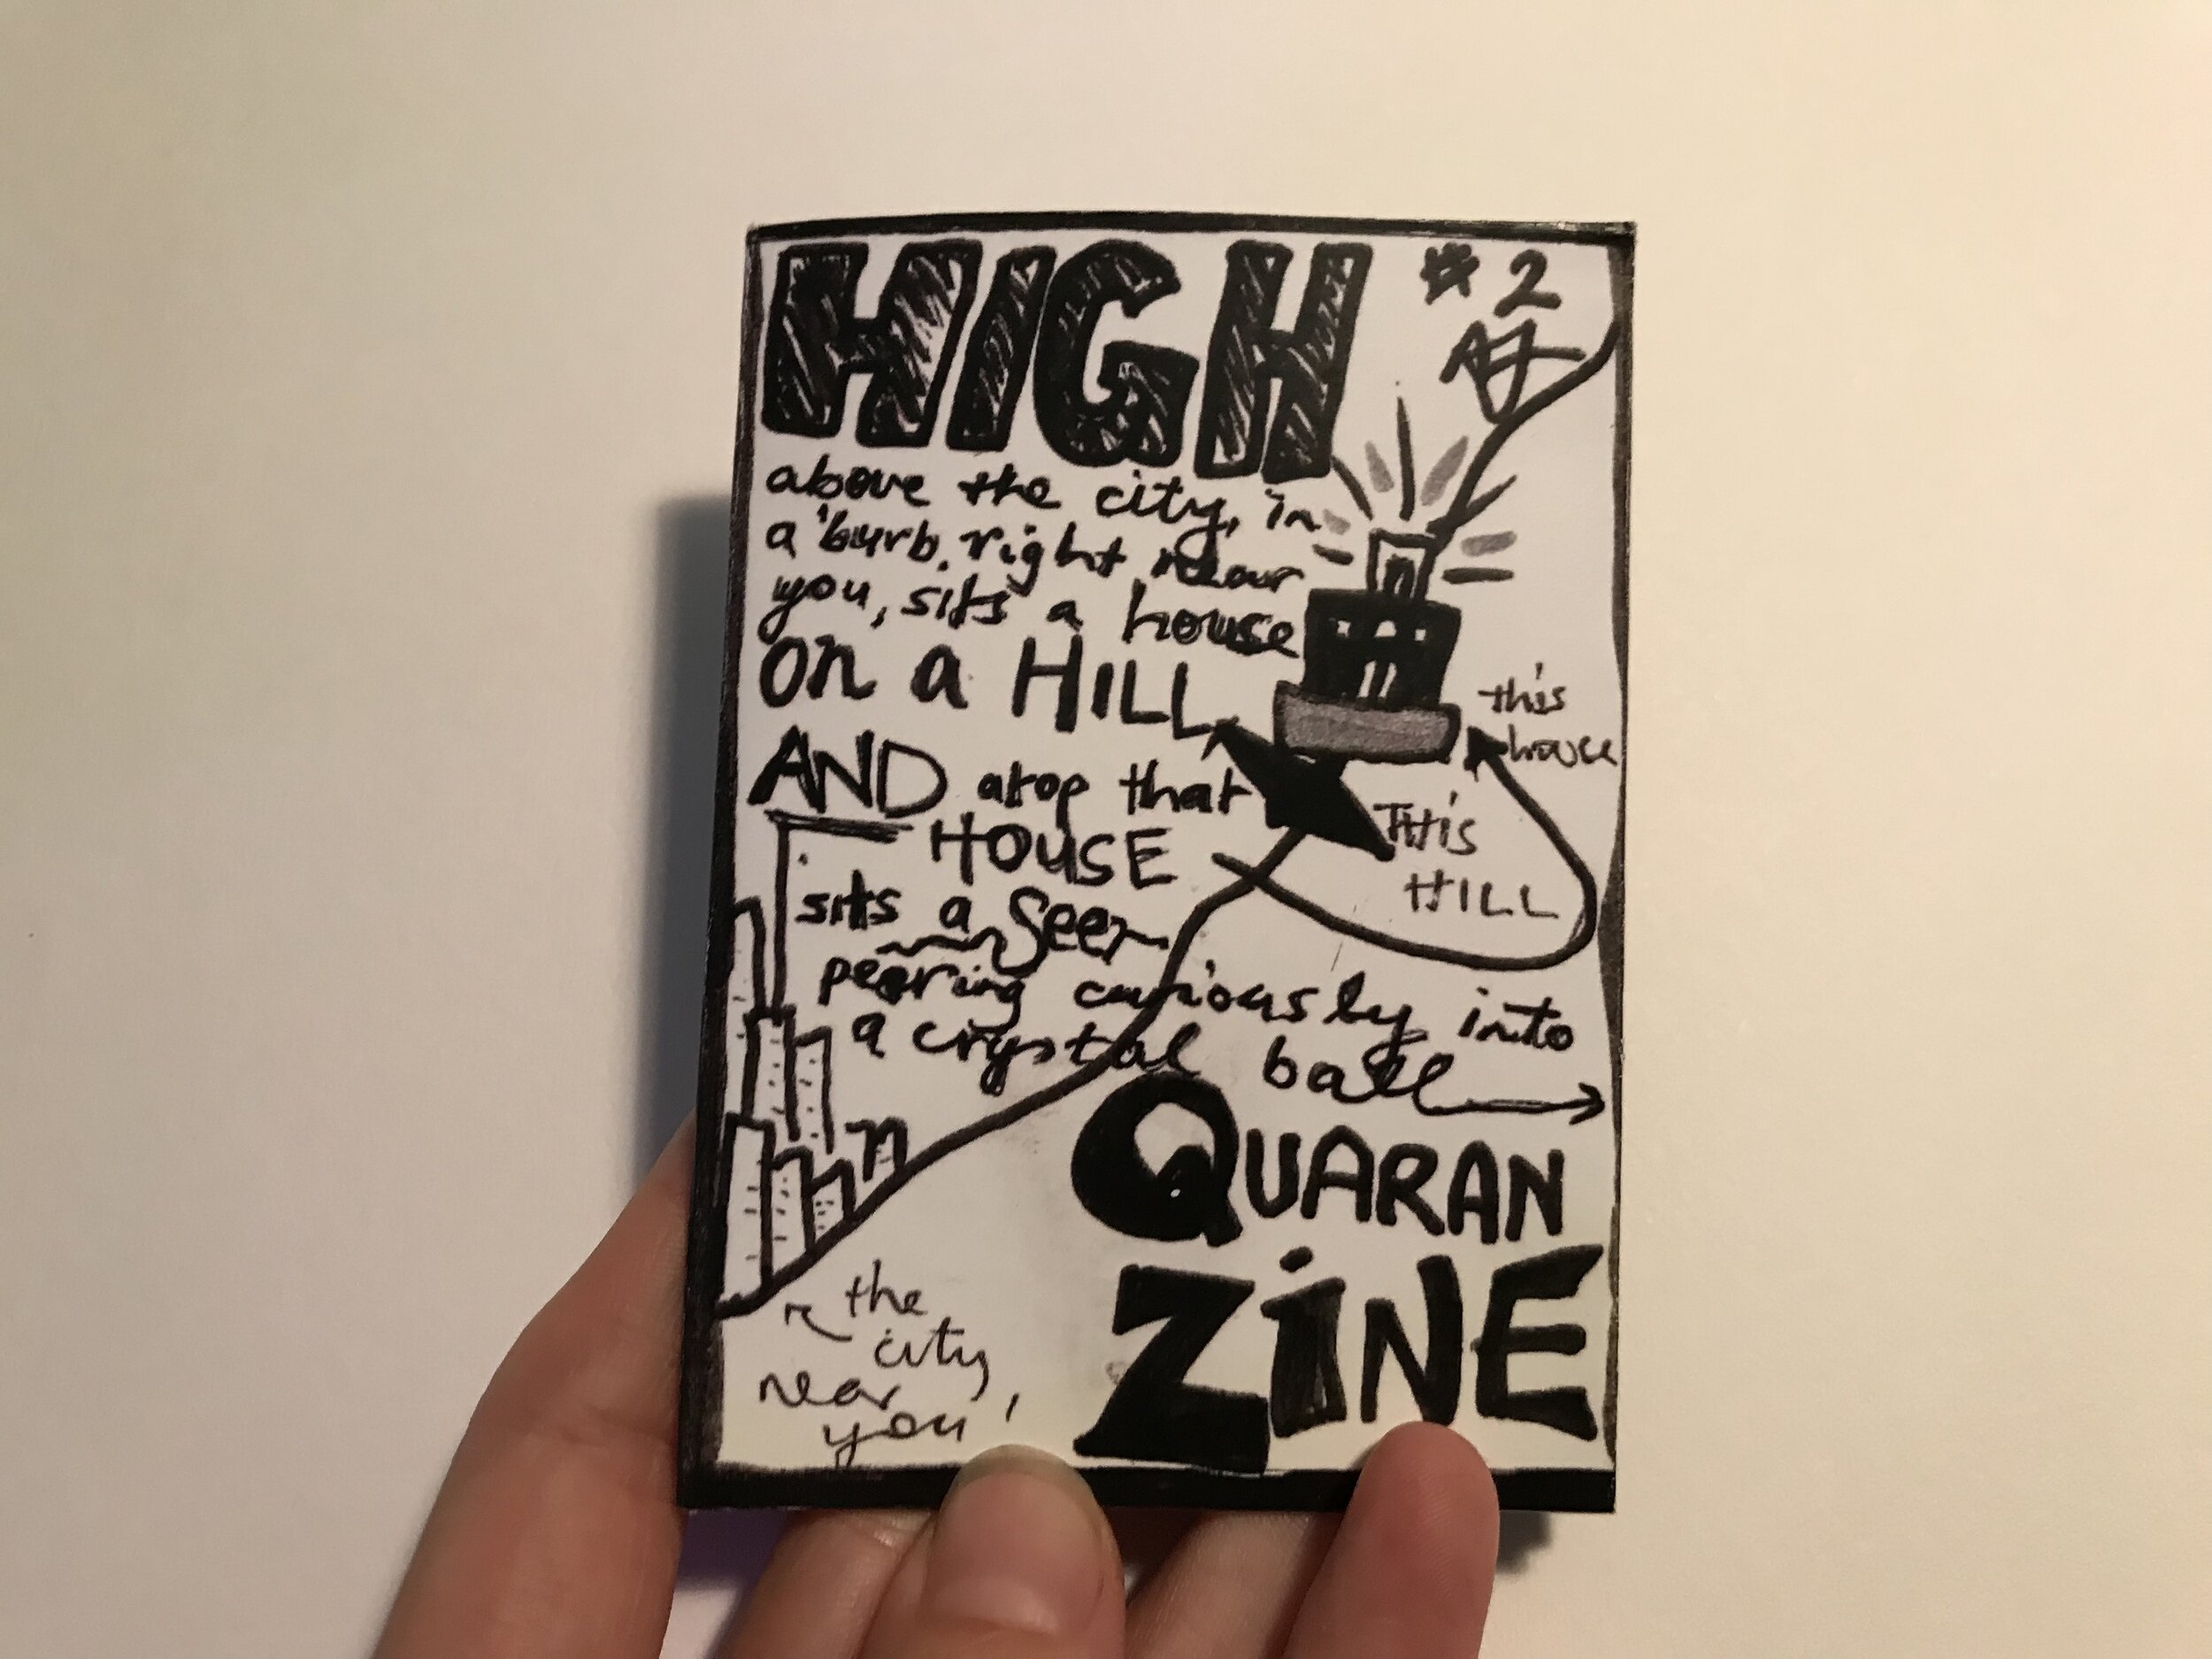 photo of fingers holding black and white zine: mostly text, also drawing of a building on a hill